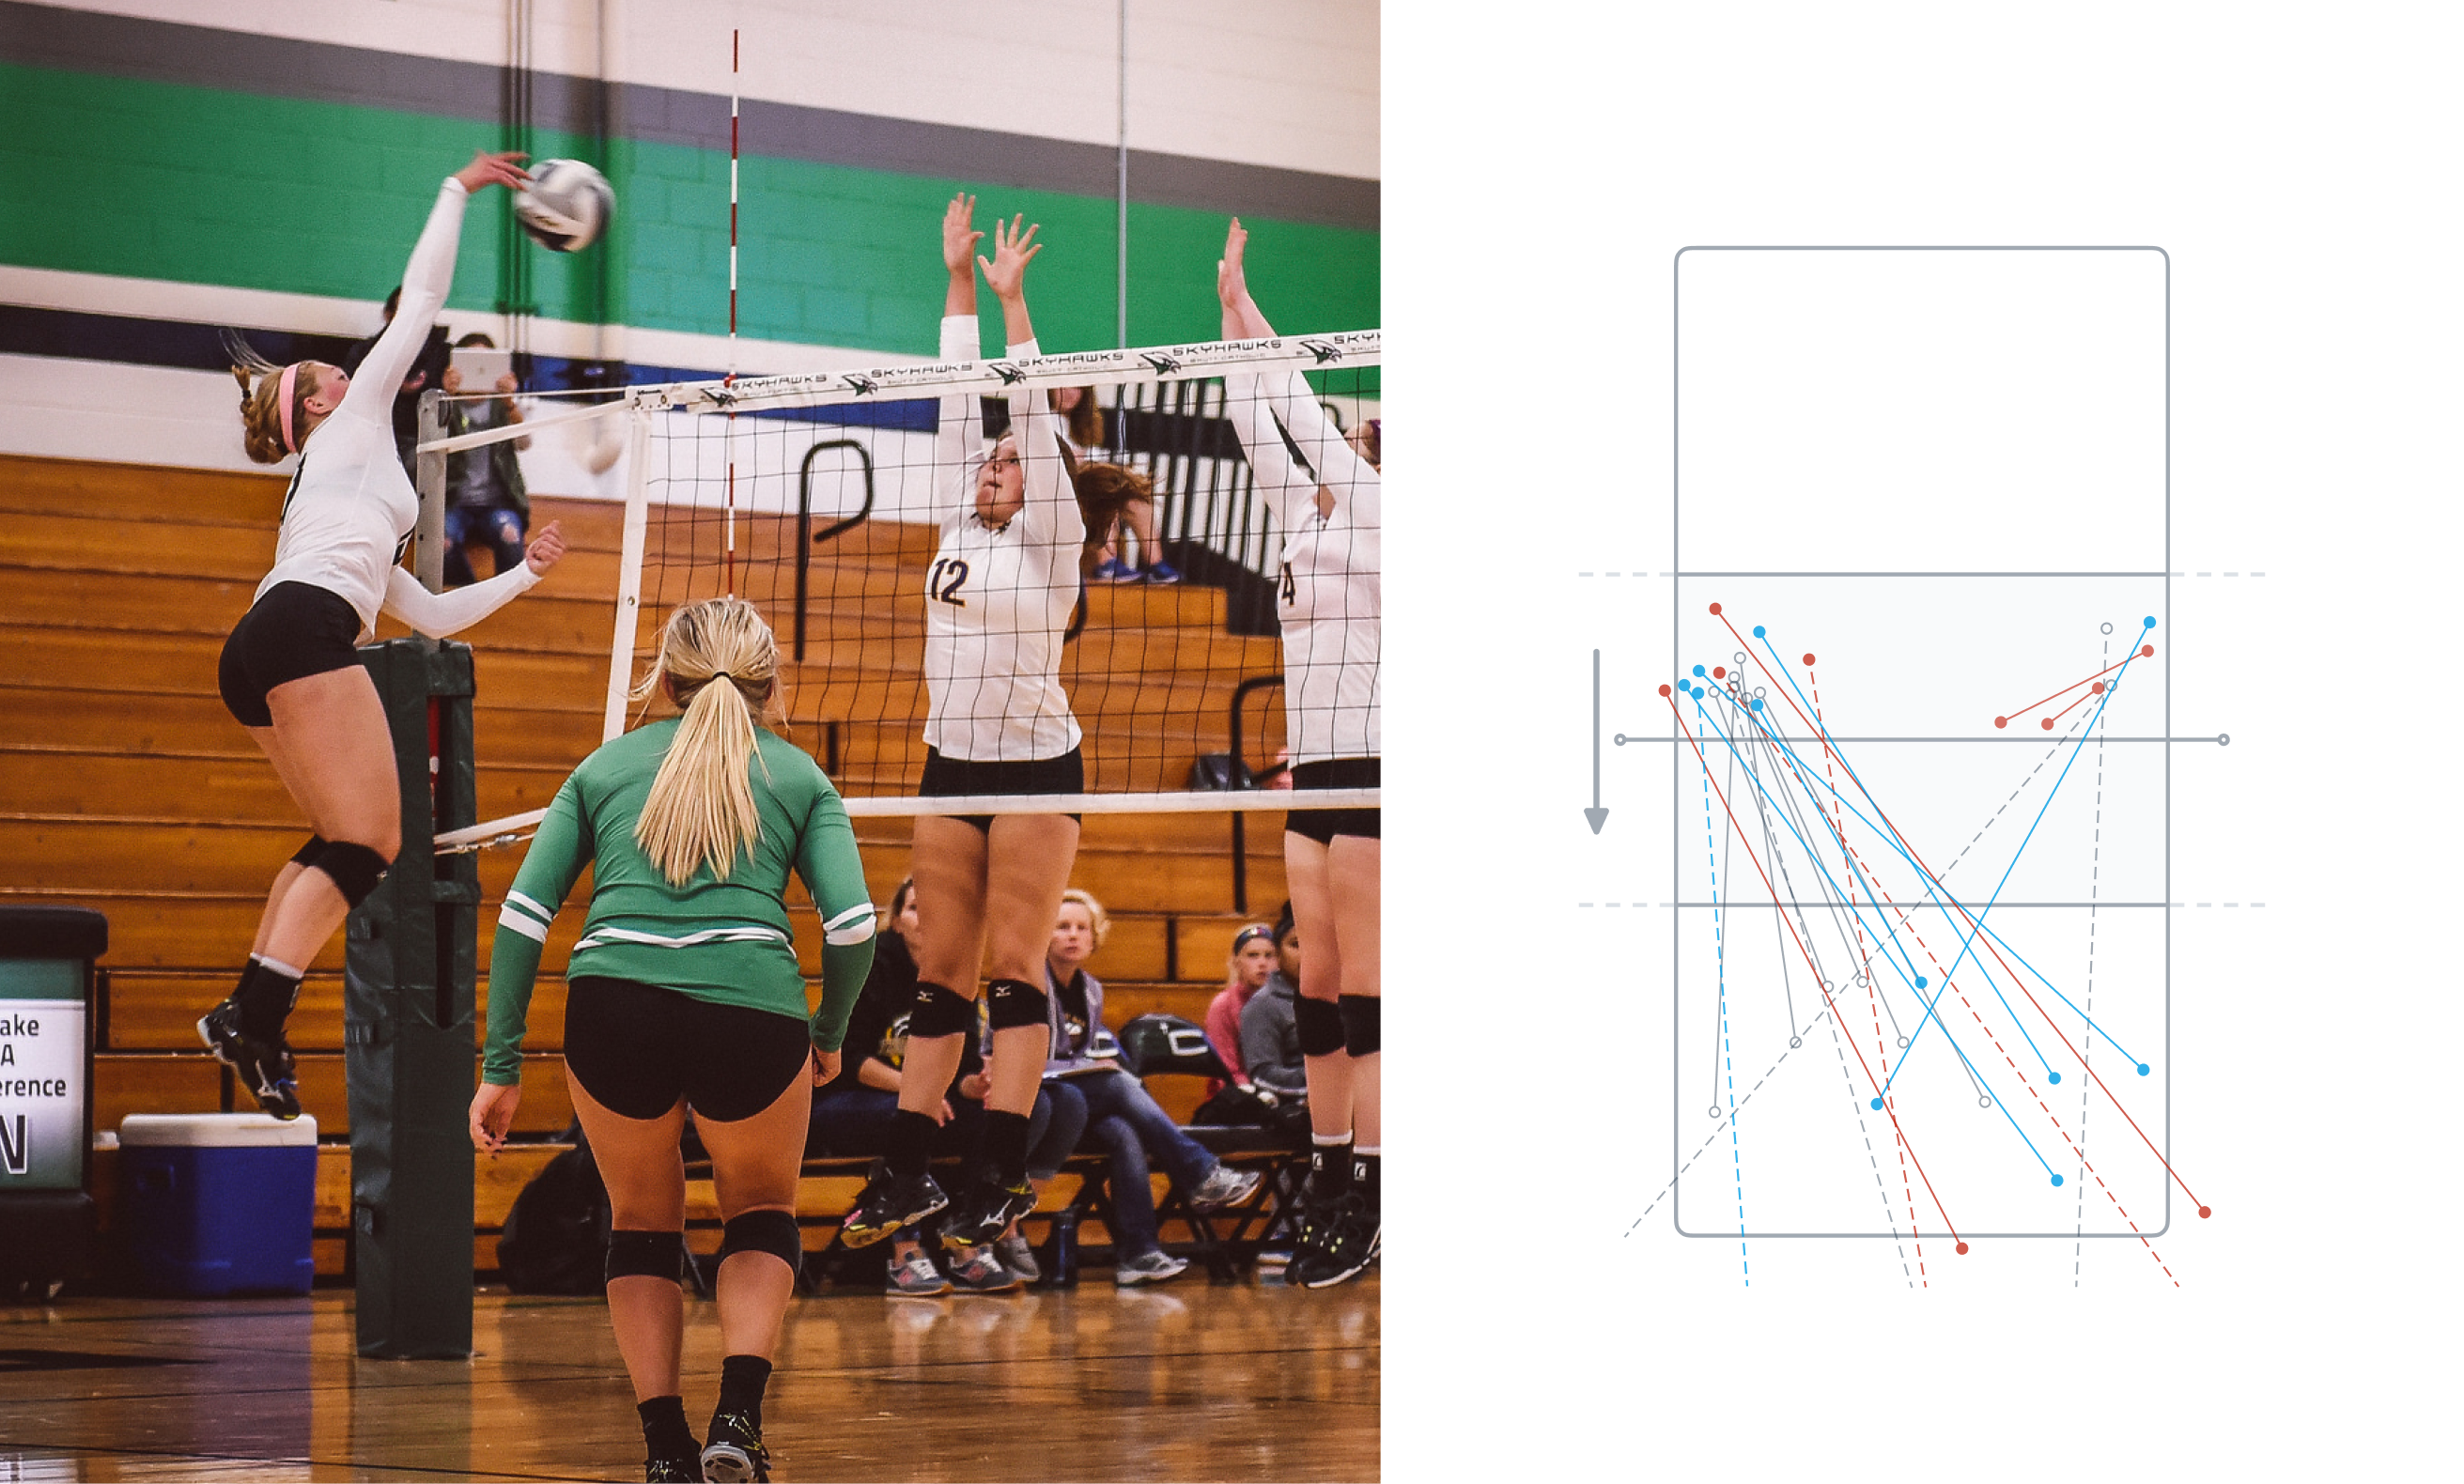 A split image. On the left is a photo of a high school volleyball player in the middle of an attack. On the right is a visualization of a volleyball court, with lines representing attacks overlaid.